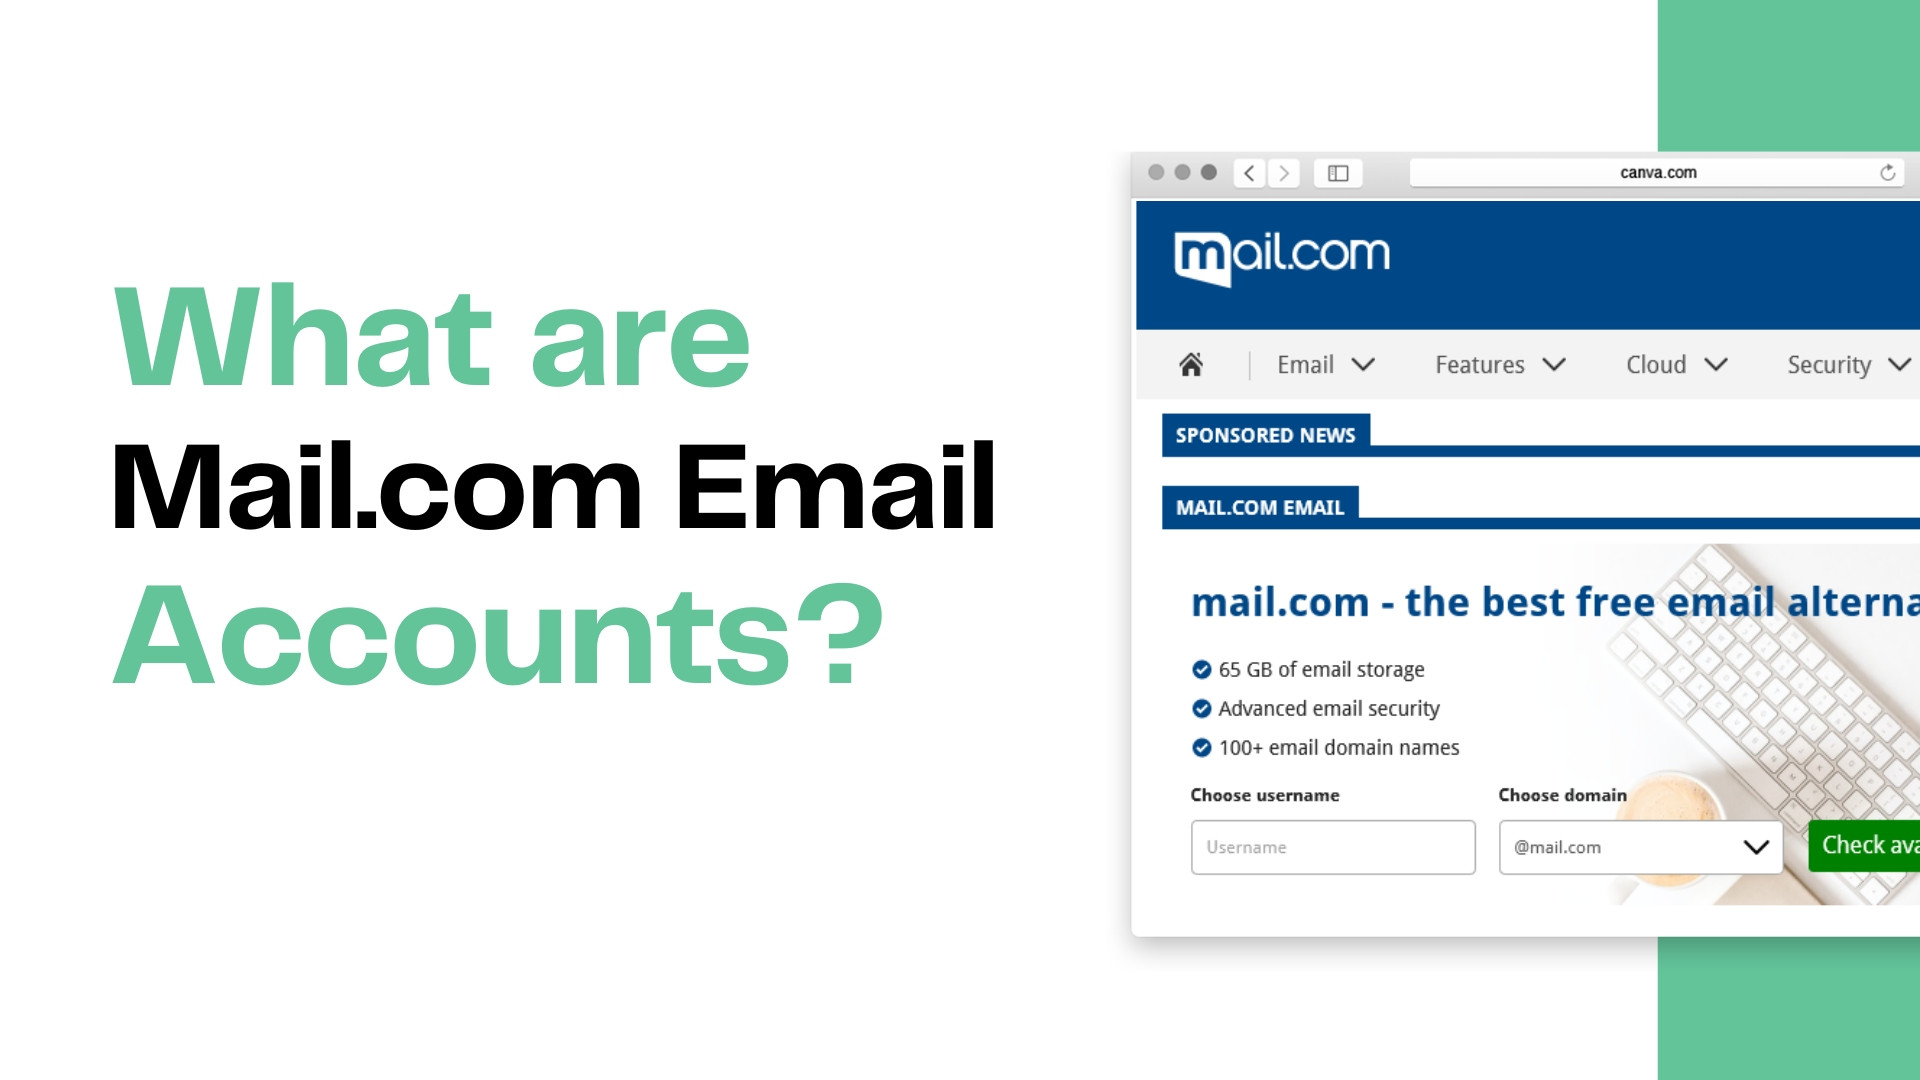 What are Mail.com Email Accounts?